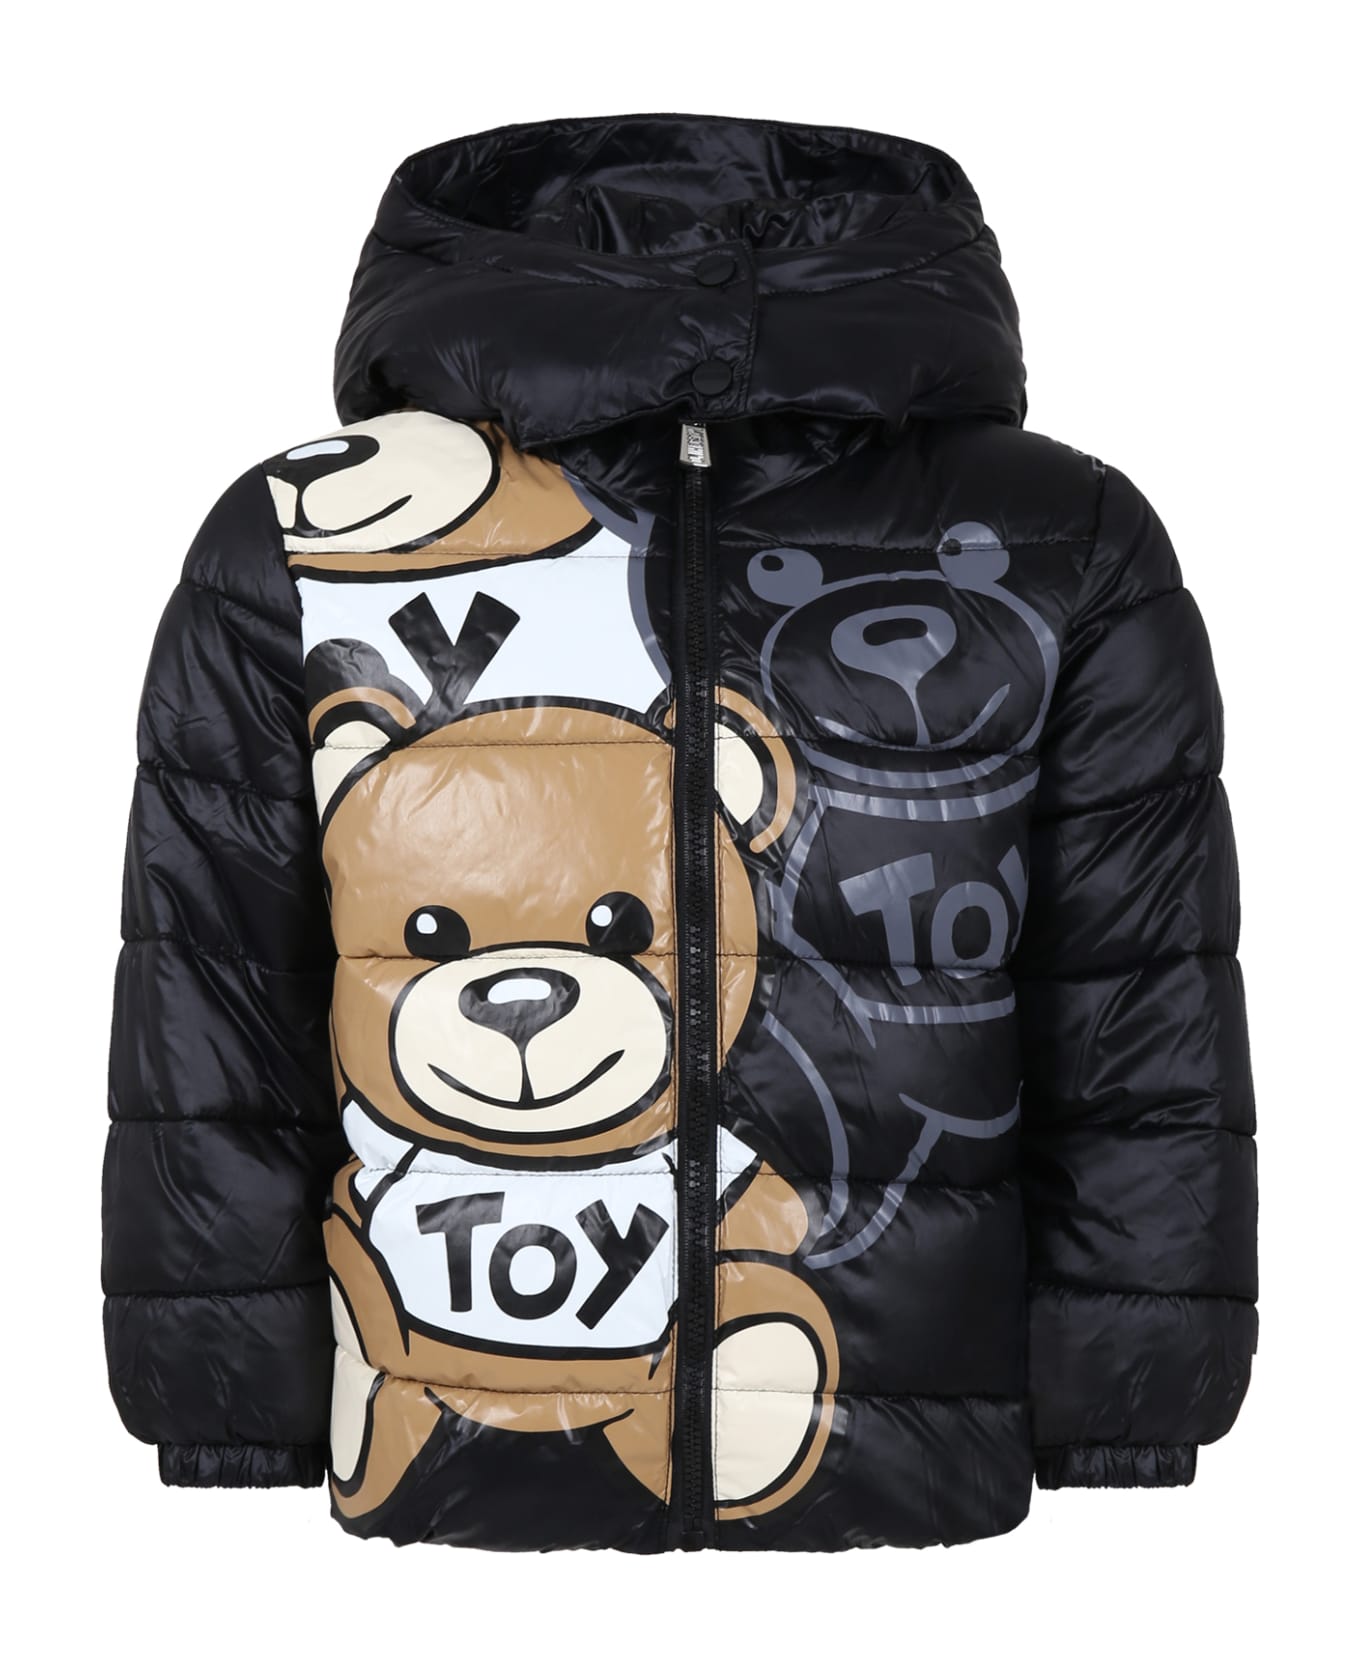 Moschino Black Down Jacket For Boy With Teddy Bears And Logo - Black コート＆ジャケット